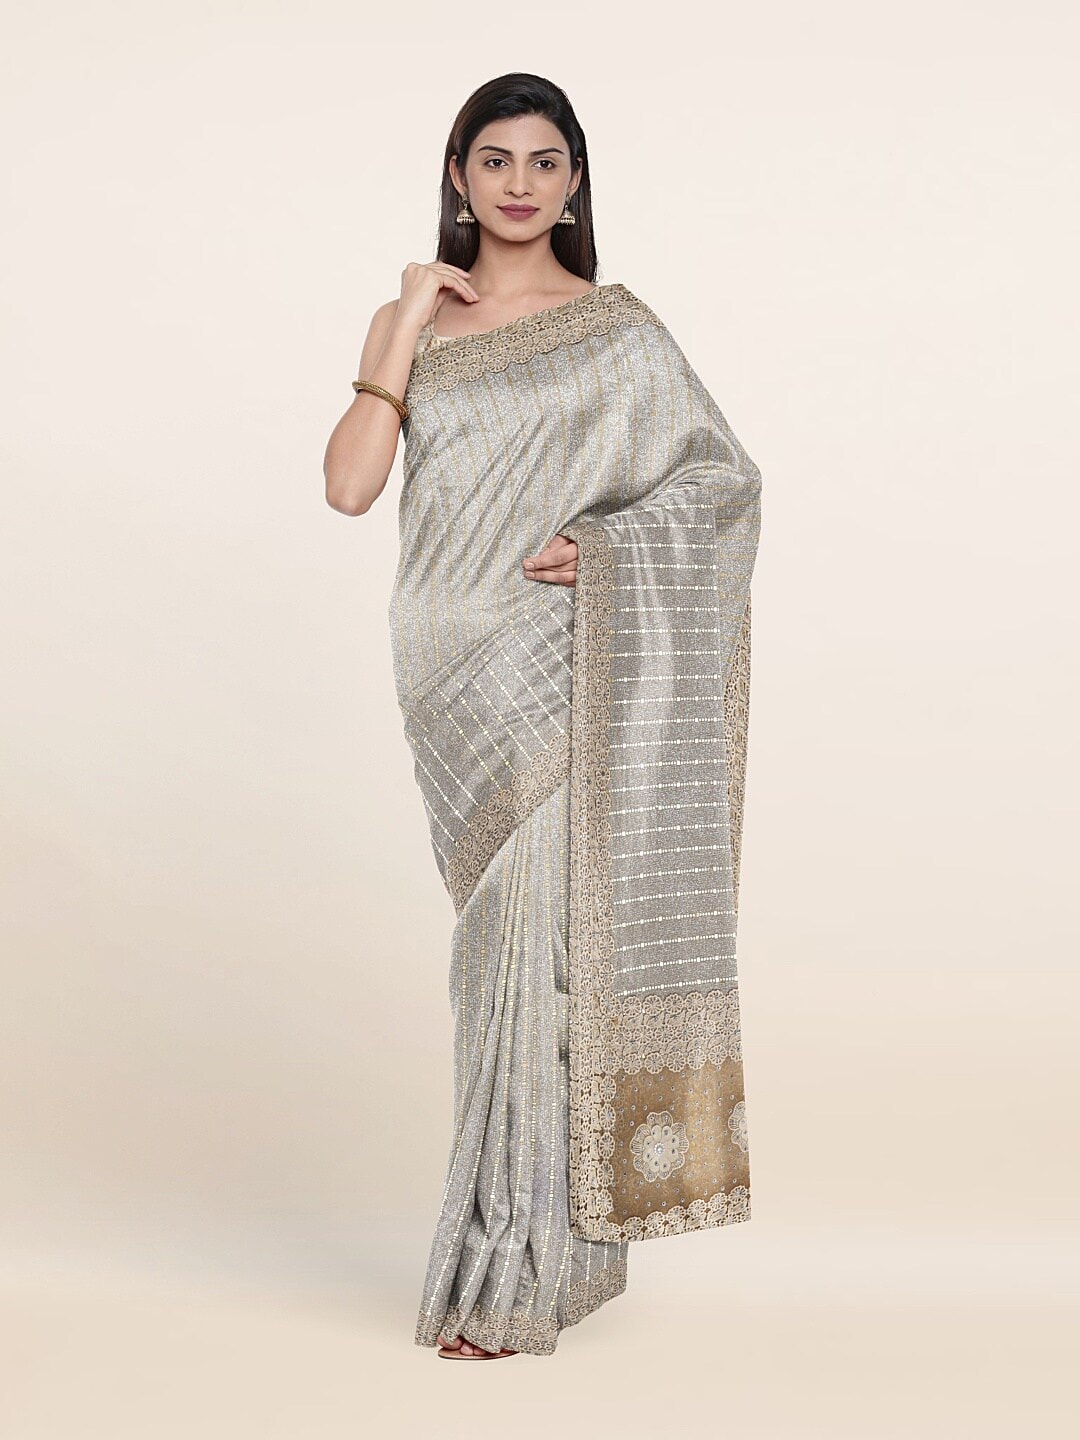 Pothys Silver-Toned & Gold-Toned Striped Beads and Stones Saree Price in India